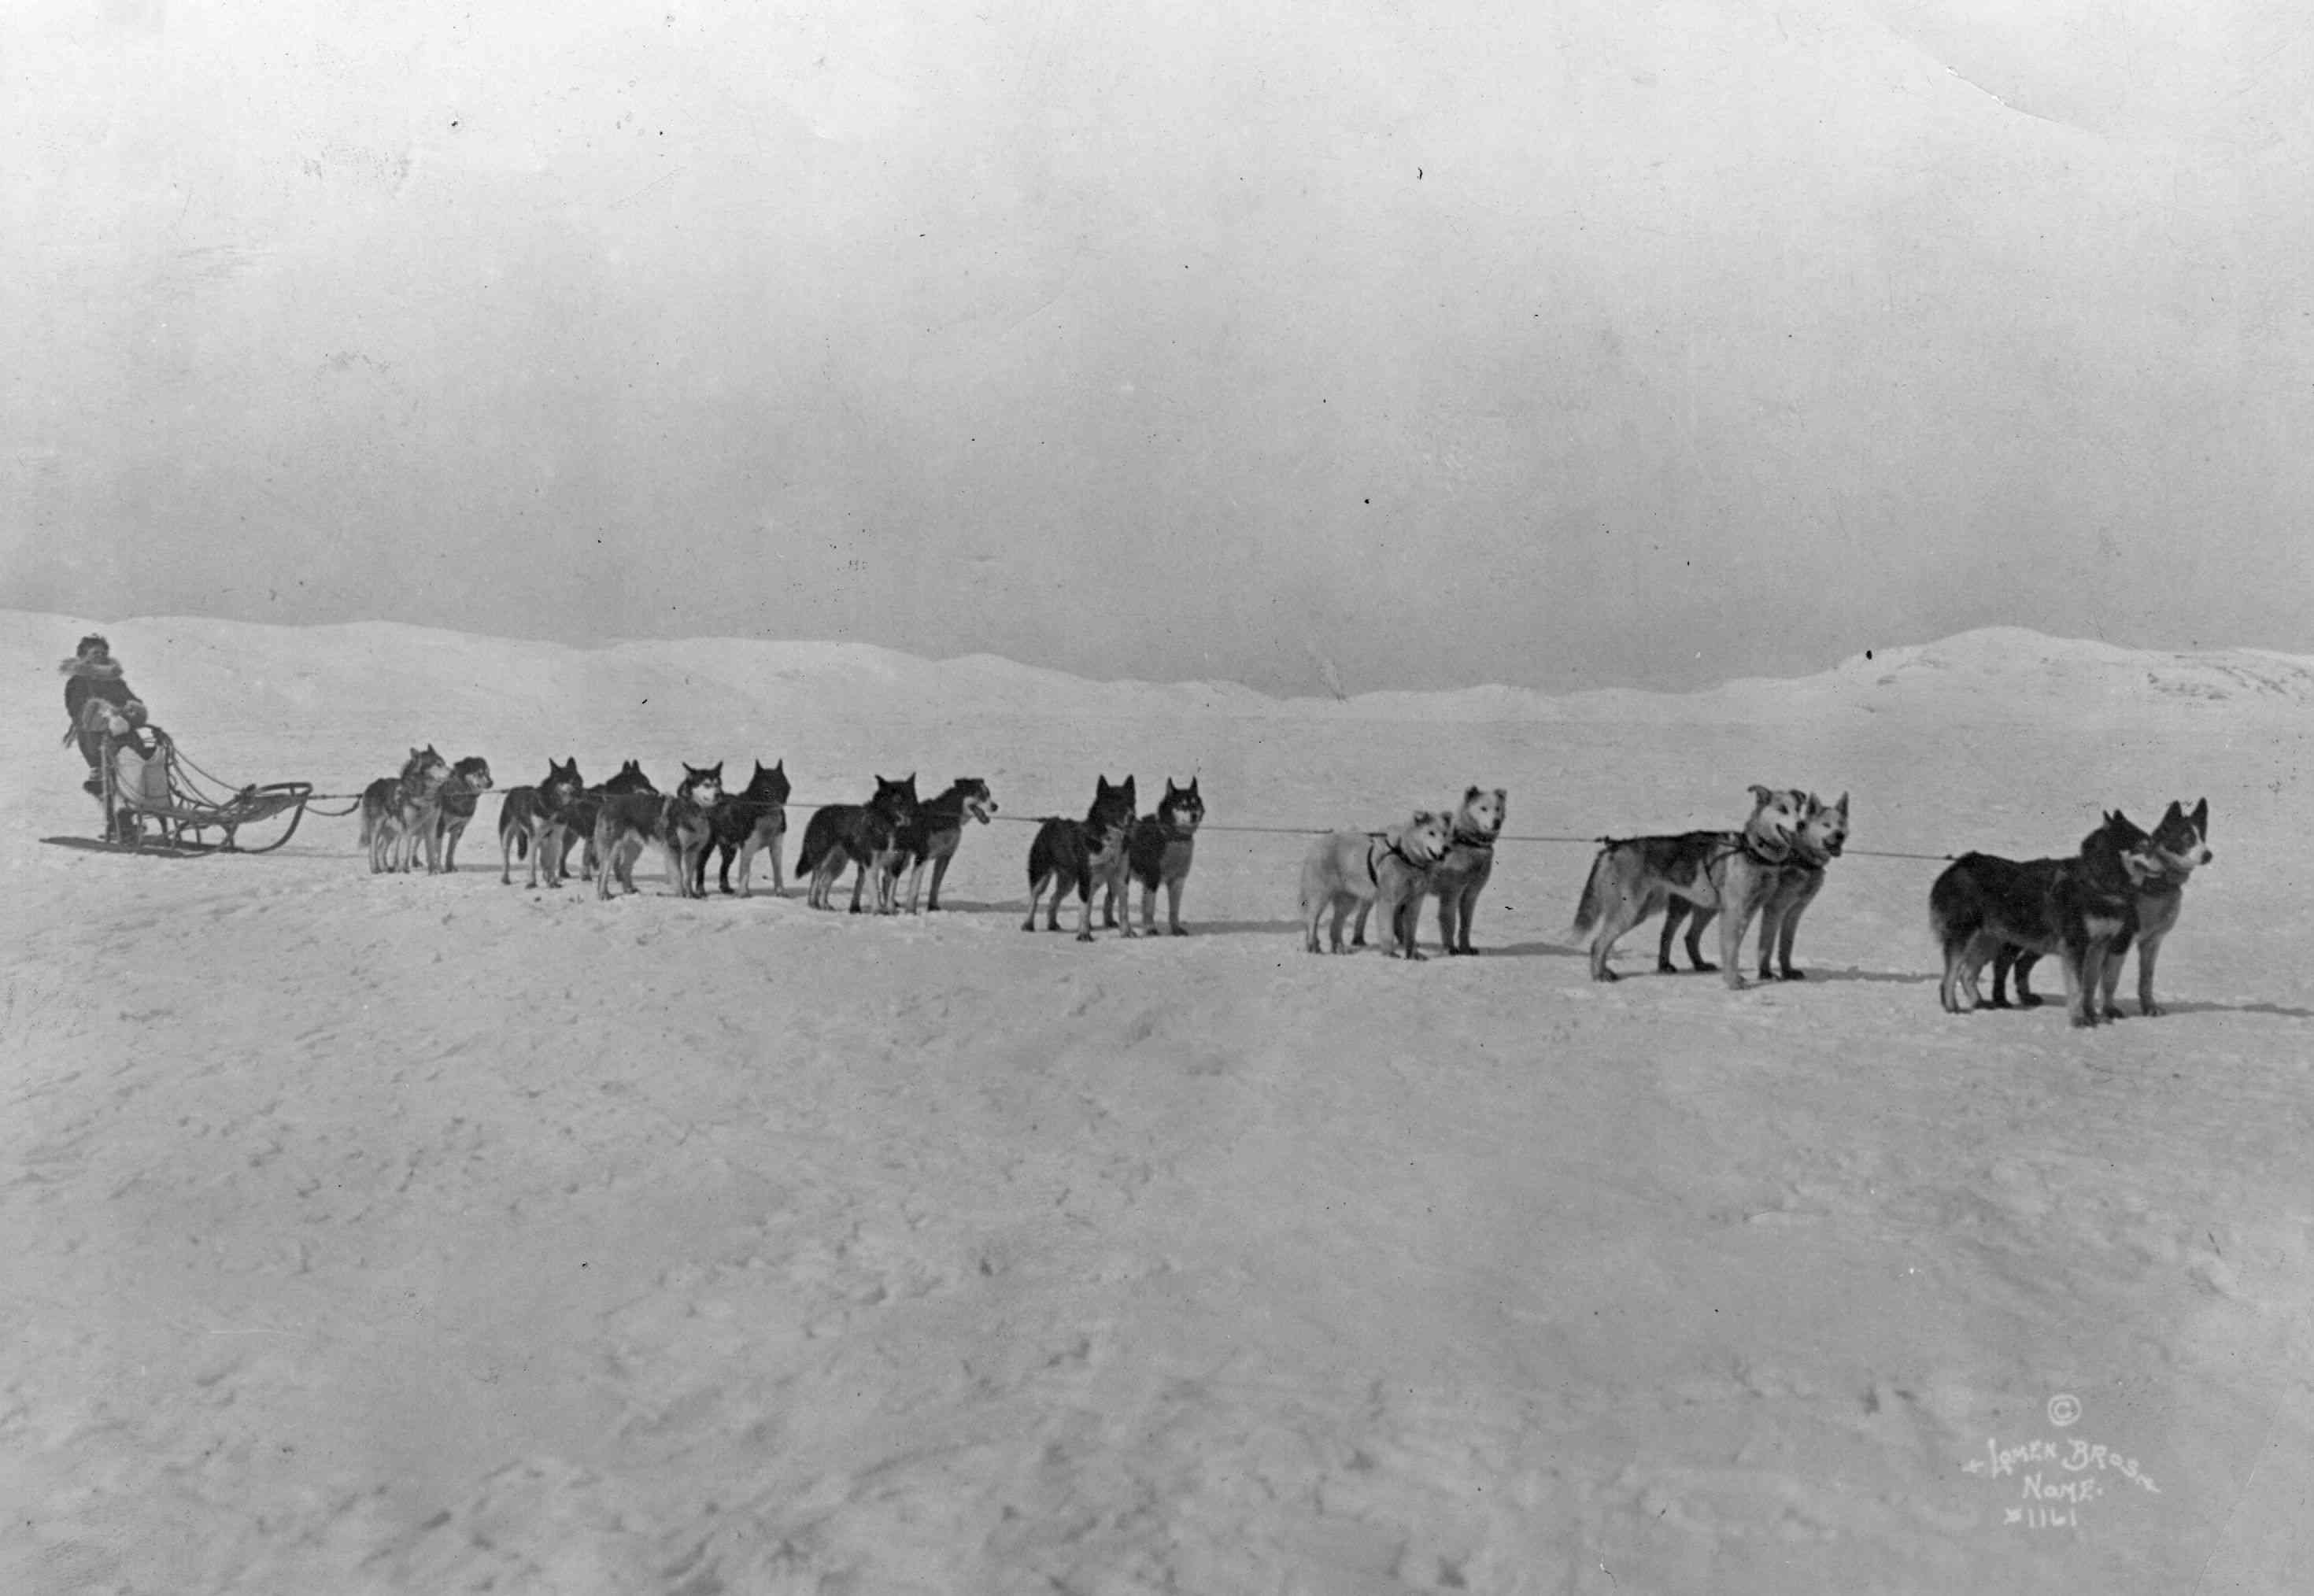 Leionhard Seppala and his Siberian racers, the Inuit sled dogs of the North West, in the first photograph of Amundsen's departure for the North Pole.